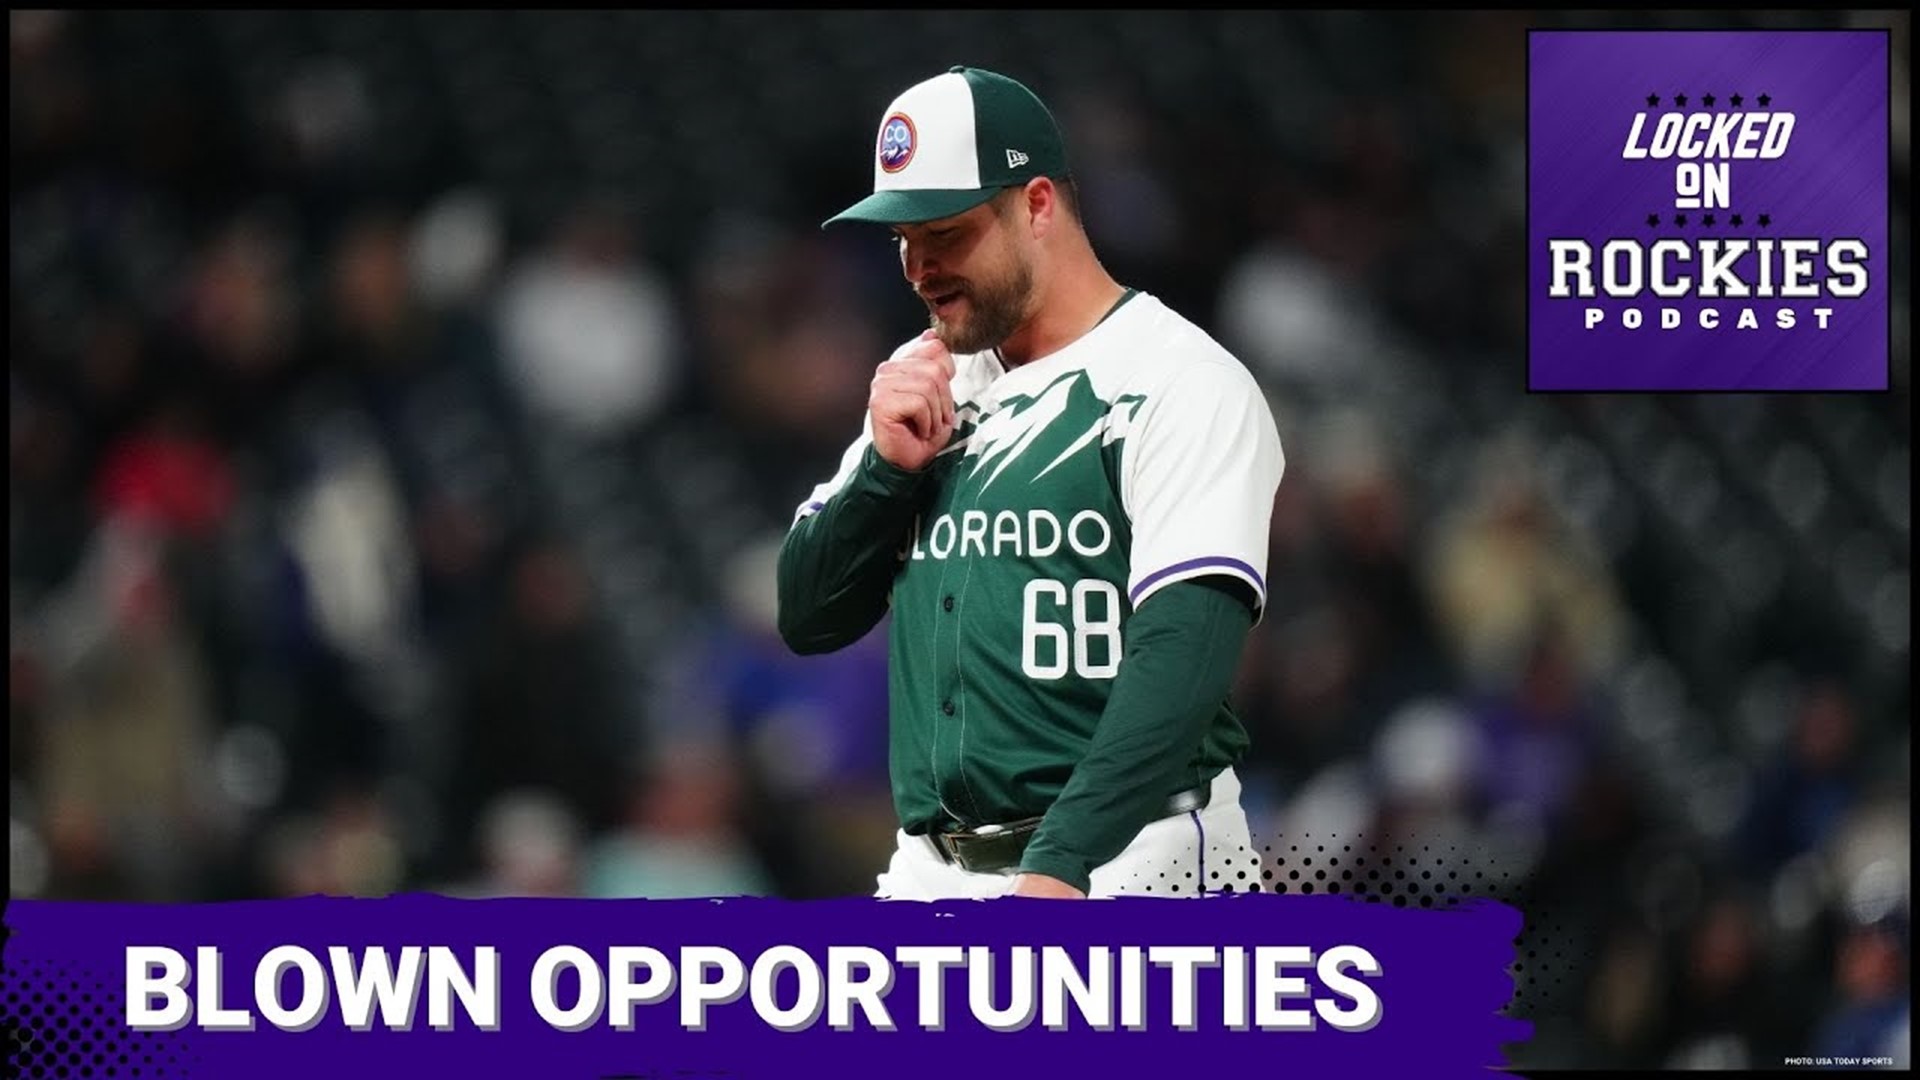 The Rockies had a chance to win their first series of the year, but with back to back blown leads, the bullpen shows that it is a major concern for this team.